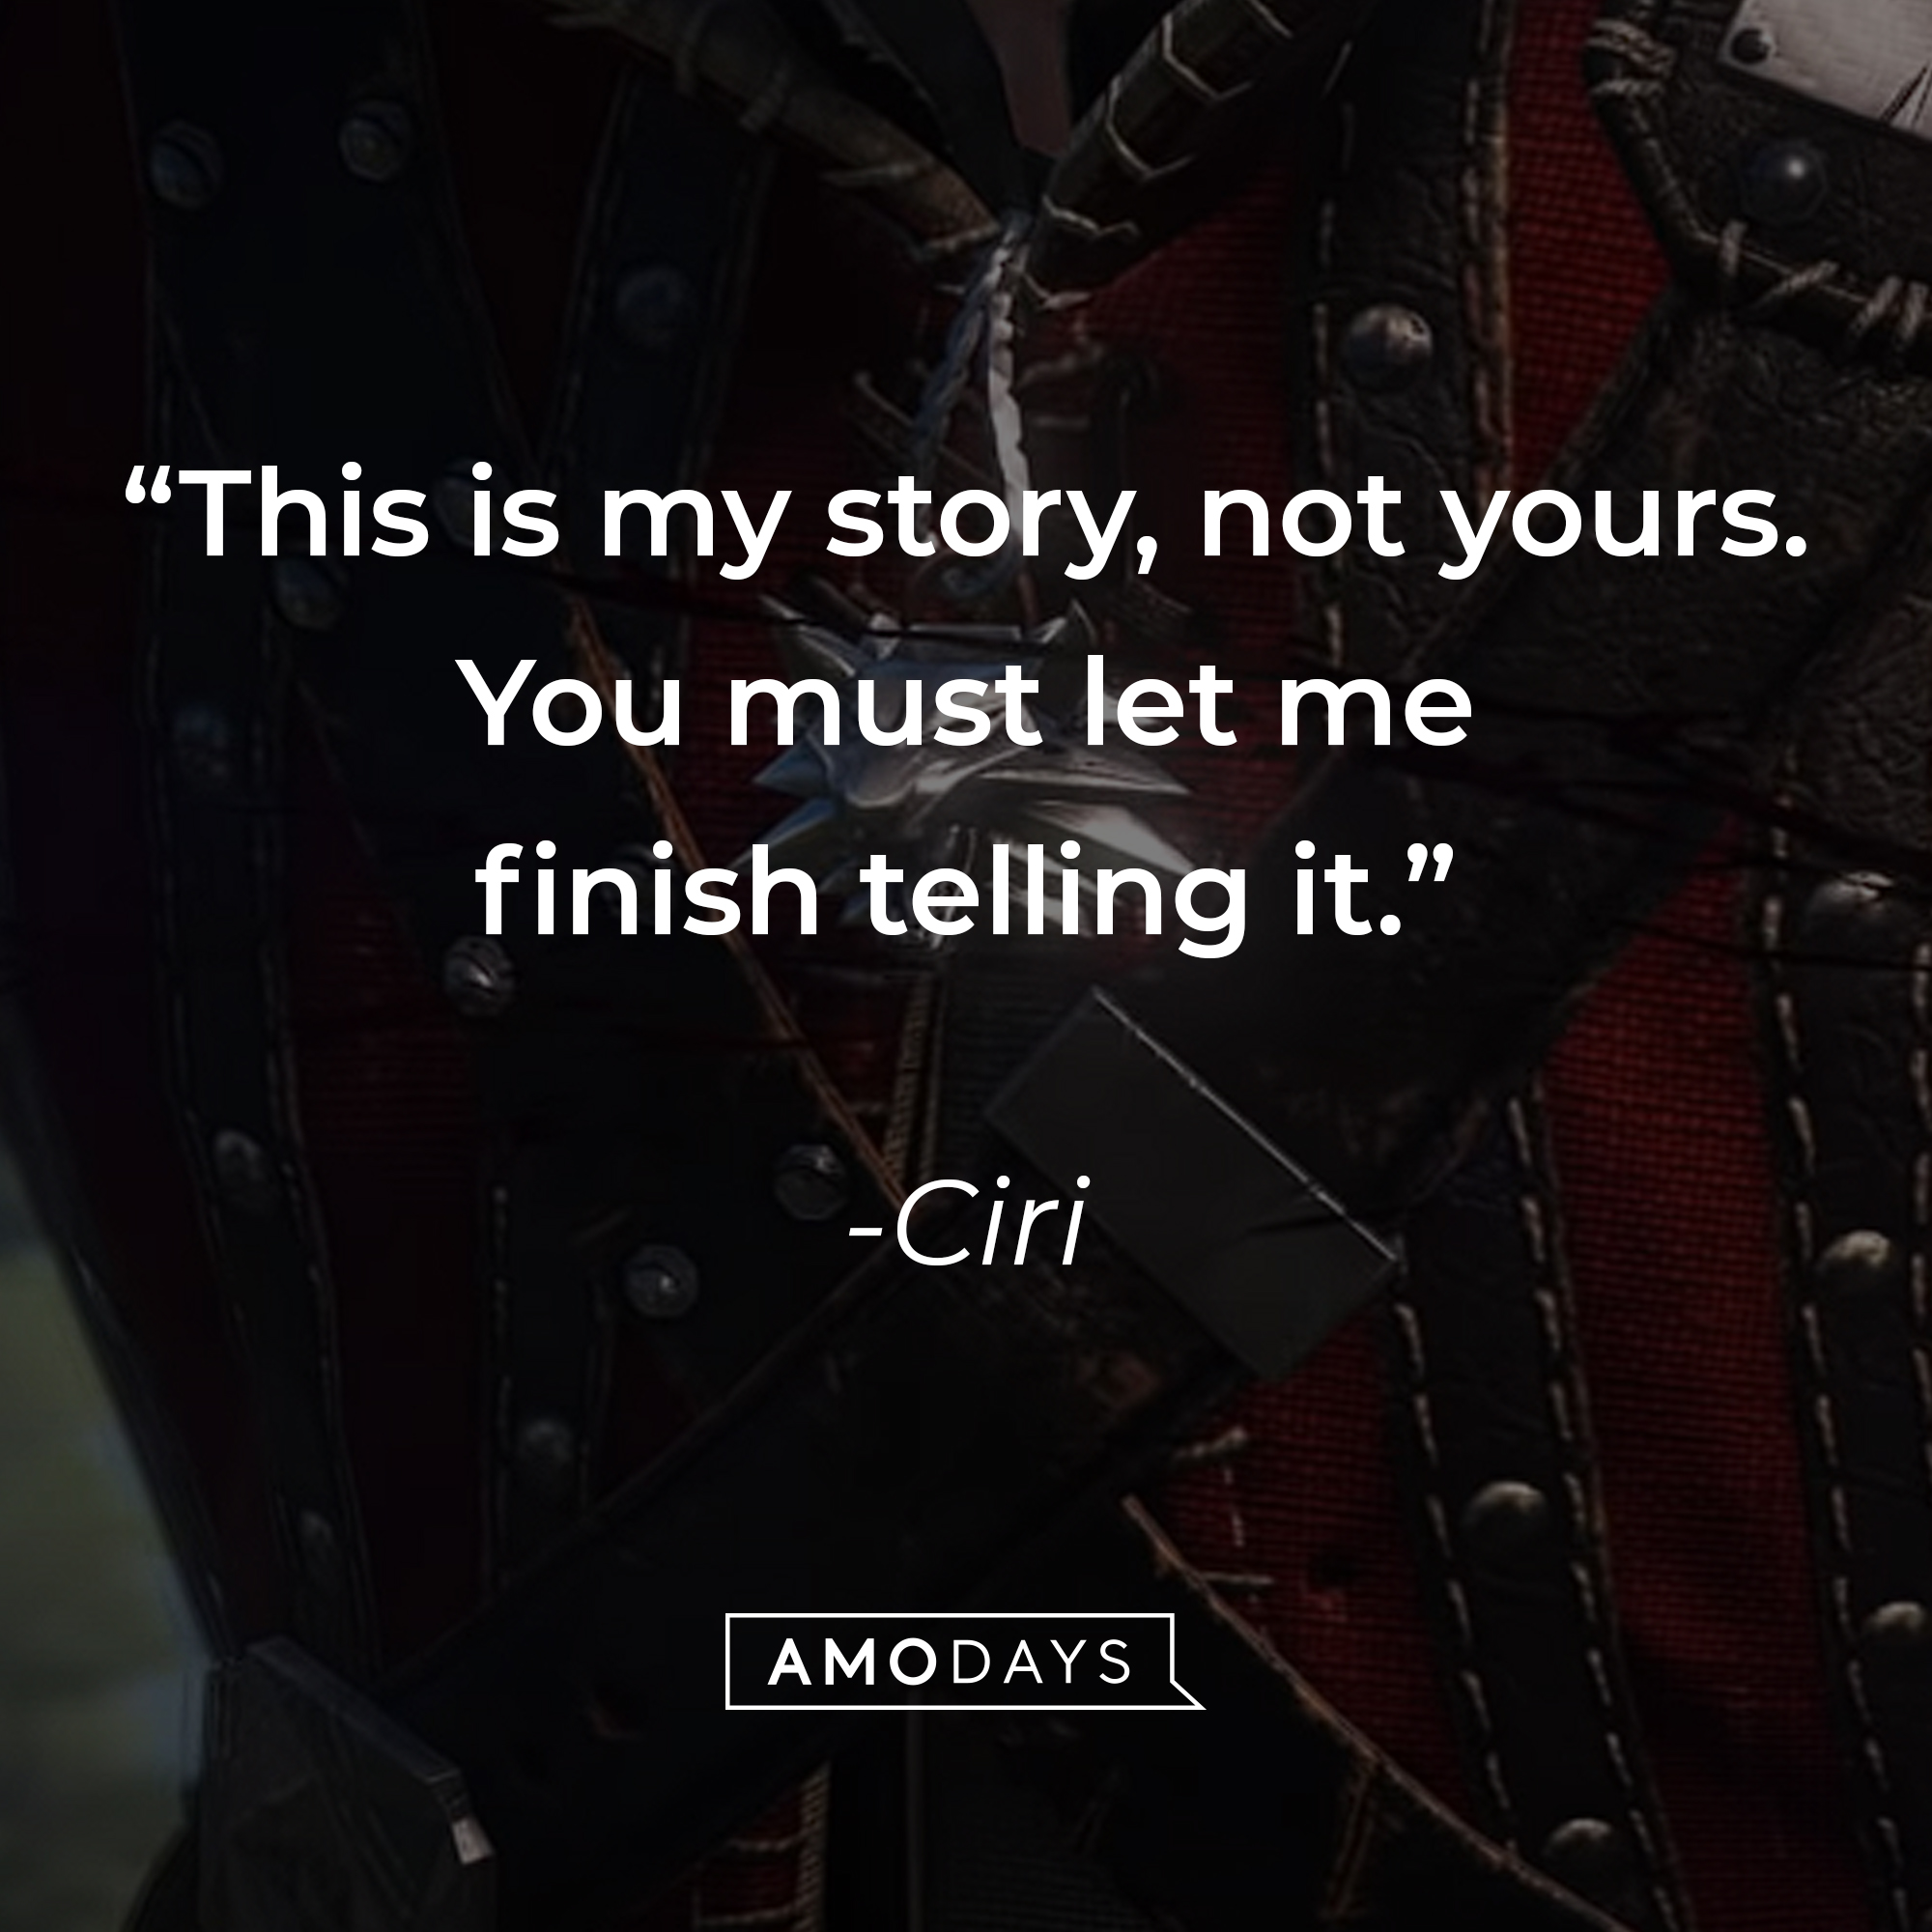 Ciri's quote: "This is my story, not yours. You must let me finish telling it."  | Source: youtube.com/CDPRED